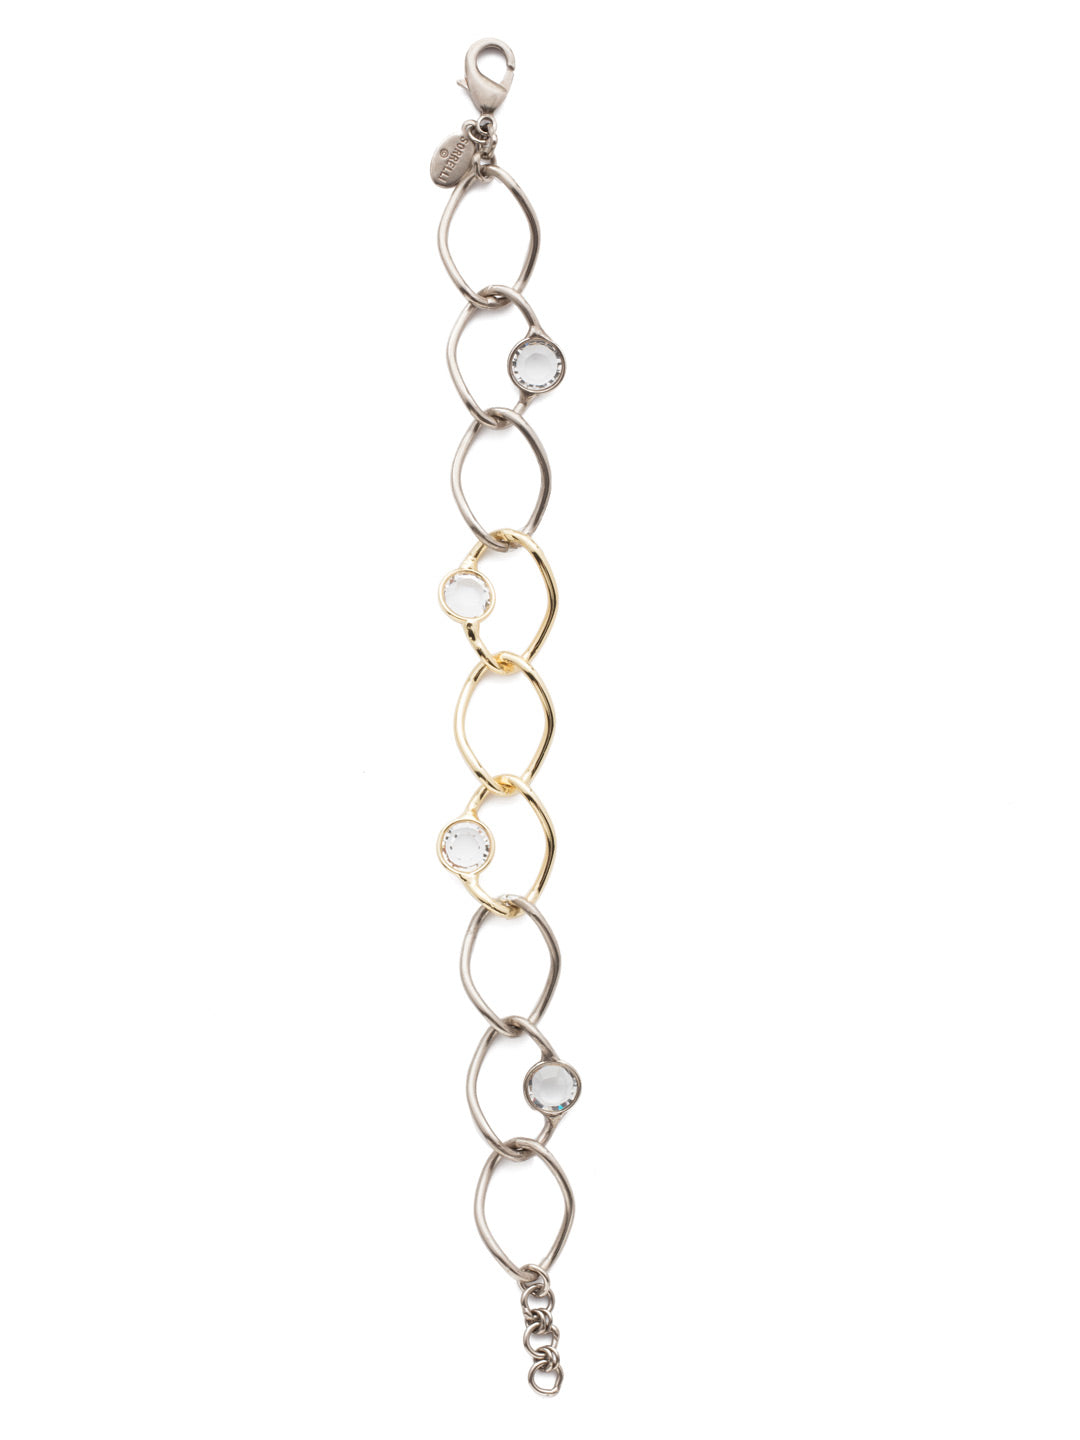 Martha Tennis Bracelet - 4BEN12MXCRY - <p>The Martha Tennis Bracelet loops on lovely metal links dotted with drops of sparkling round crystals. It's a style staple. From Sorrelli's Crystal collection in our Mixed Metal finish.</p>